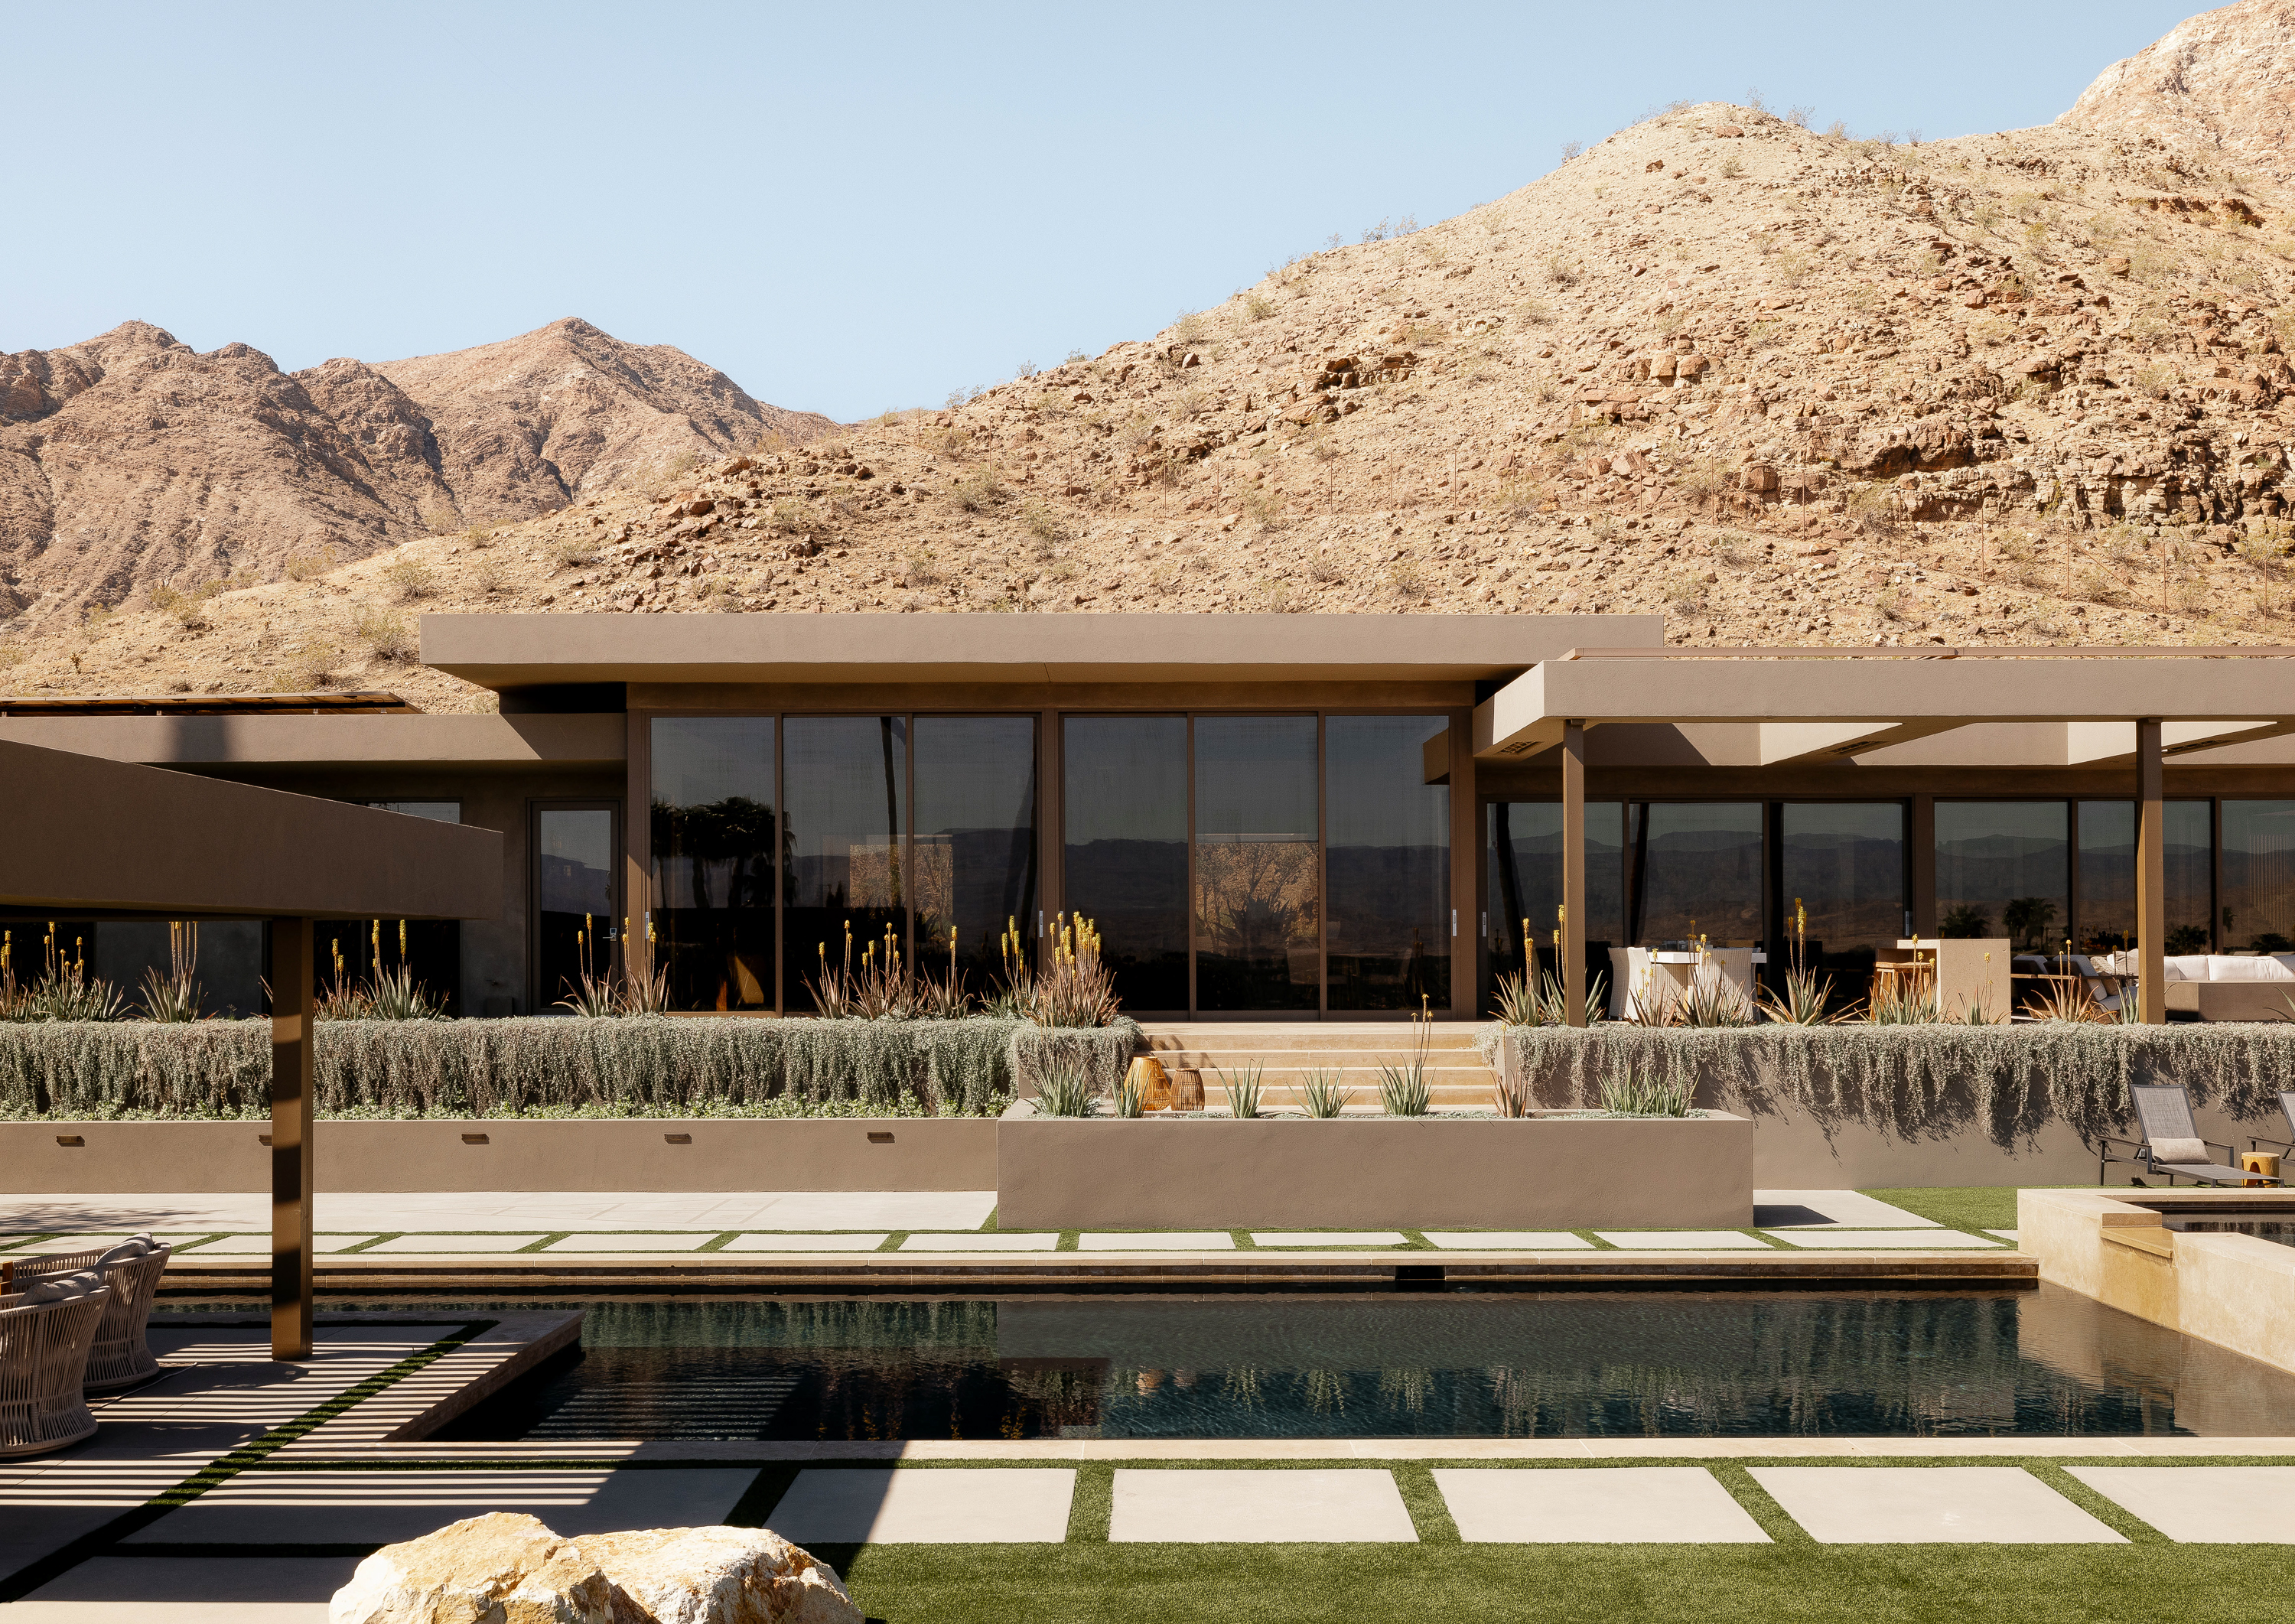 View of Palm Springs Retreat from across the pool: The house emerges elegantly, blending with the desert landscape, creating a harmonious and picturesque setting.